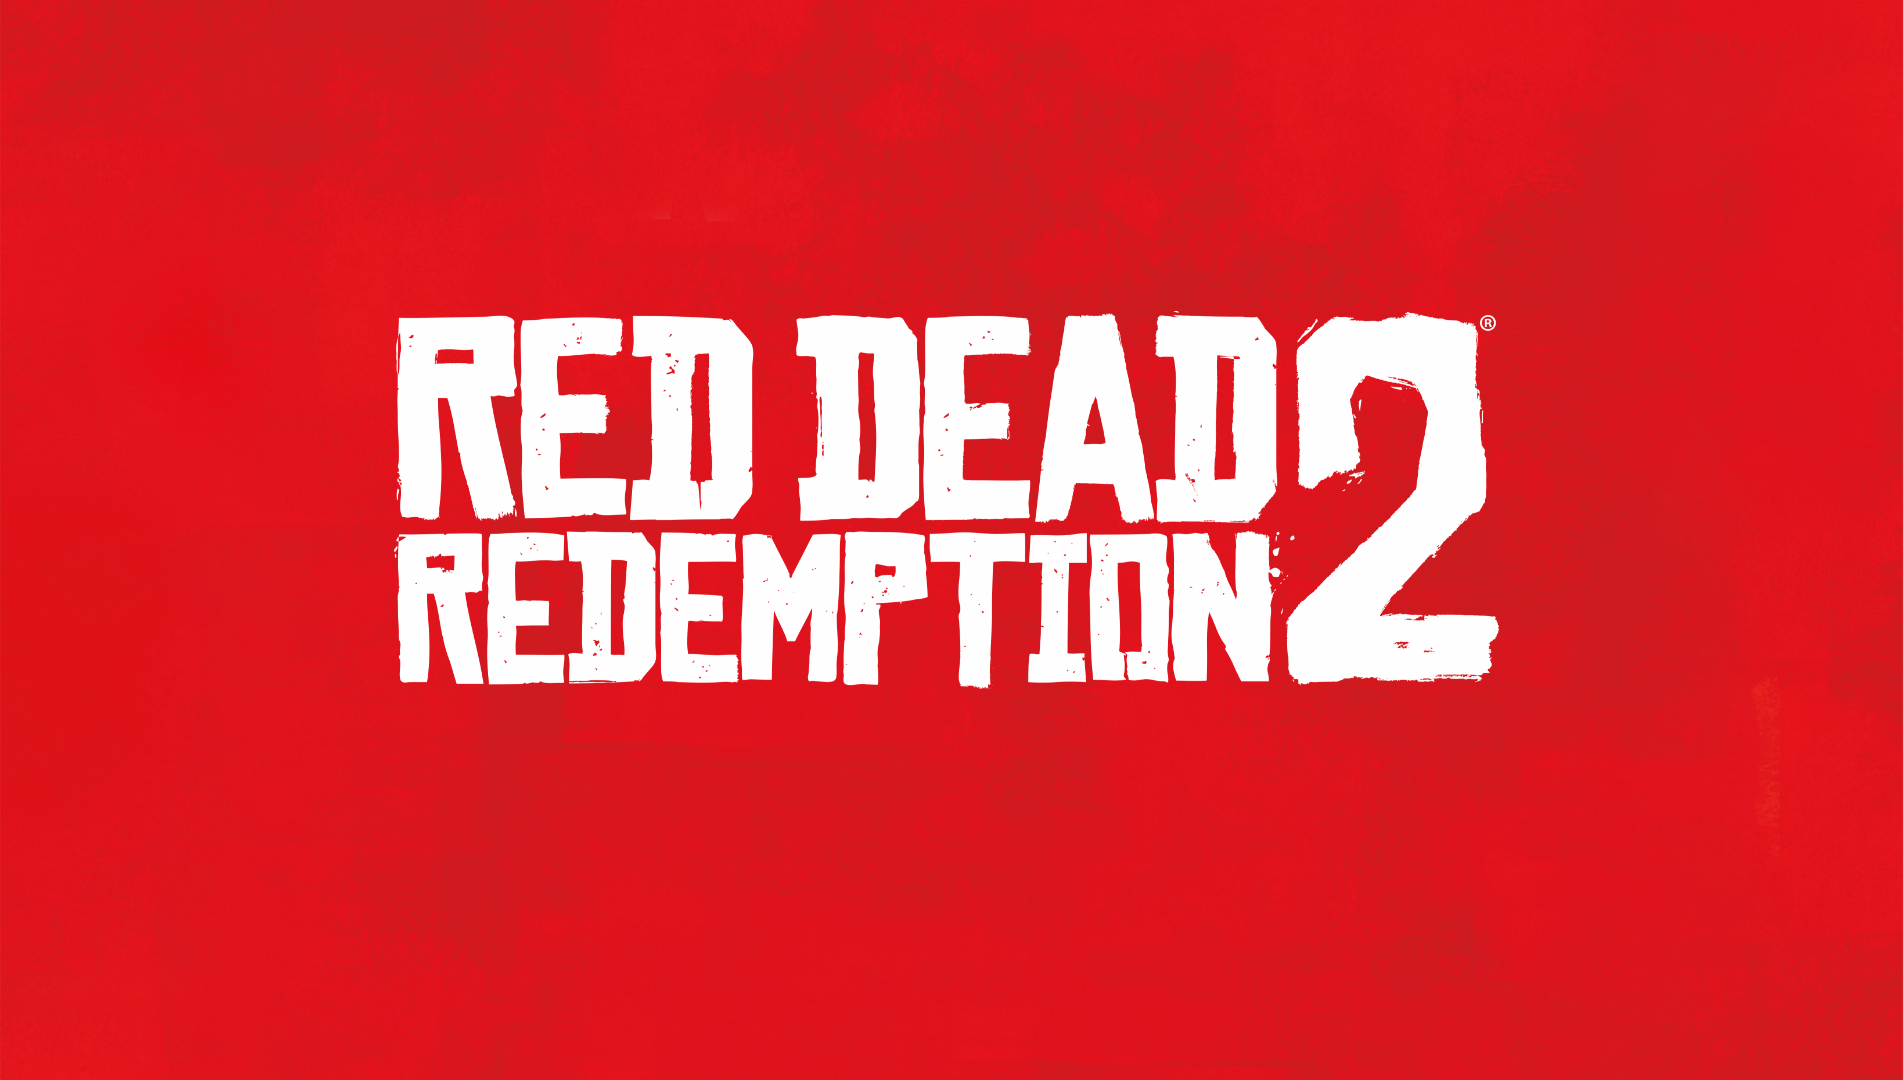 Run to See the Red Dead Redemption 2 Trailer